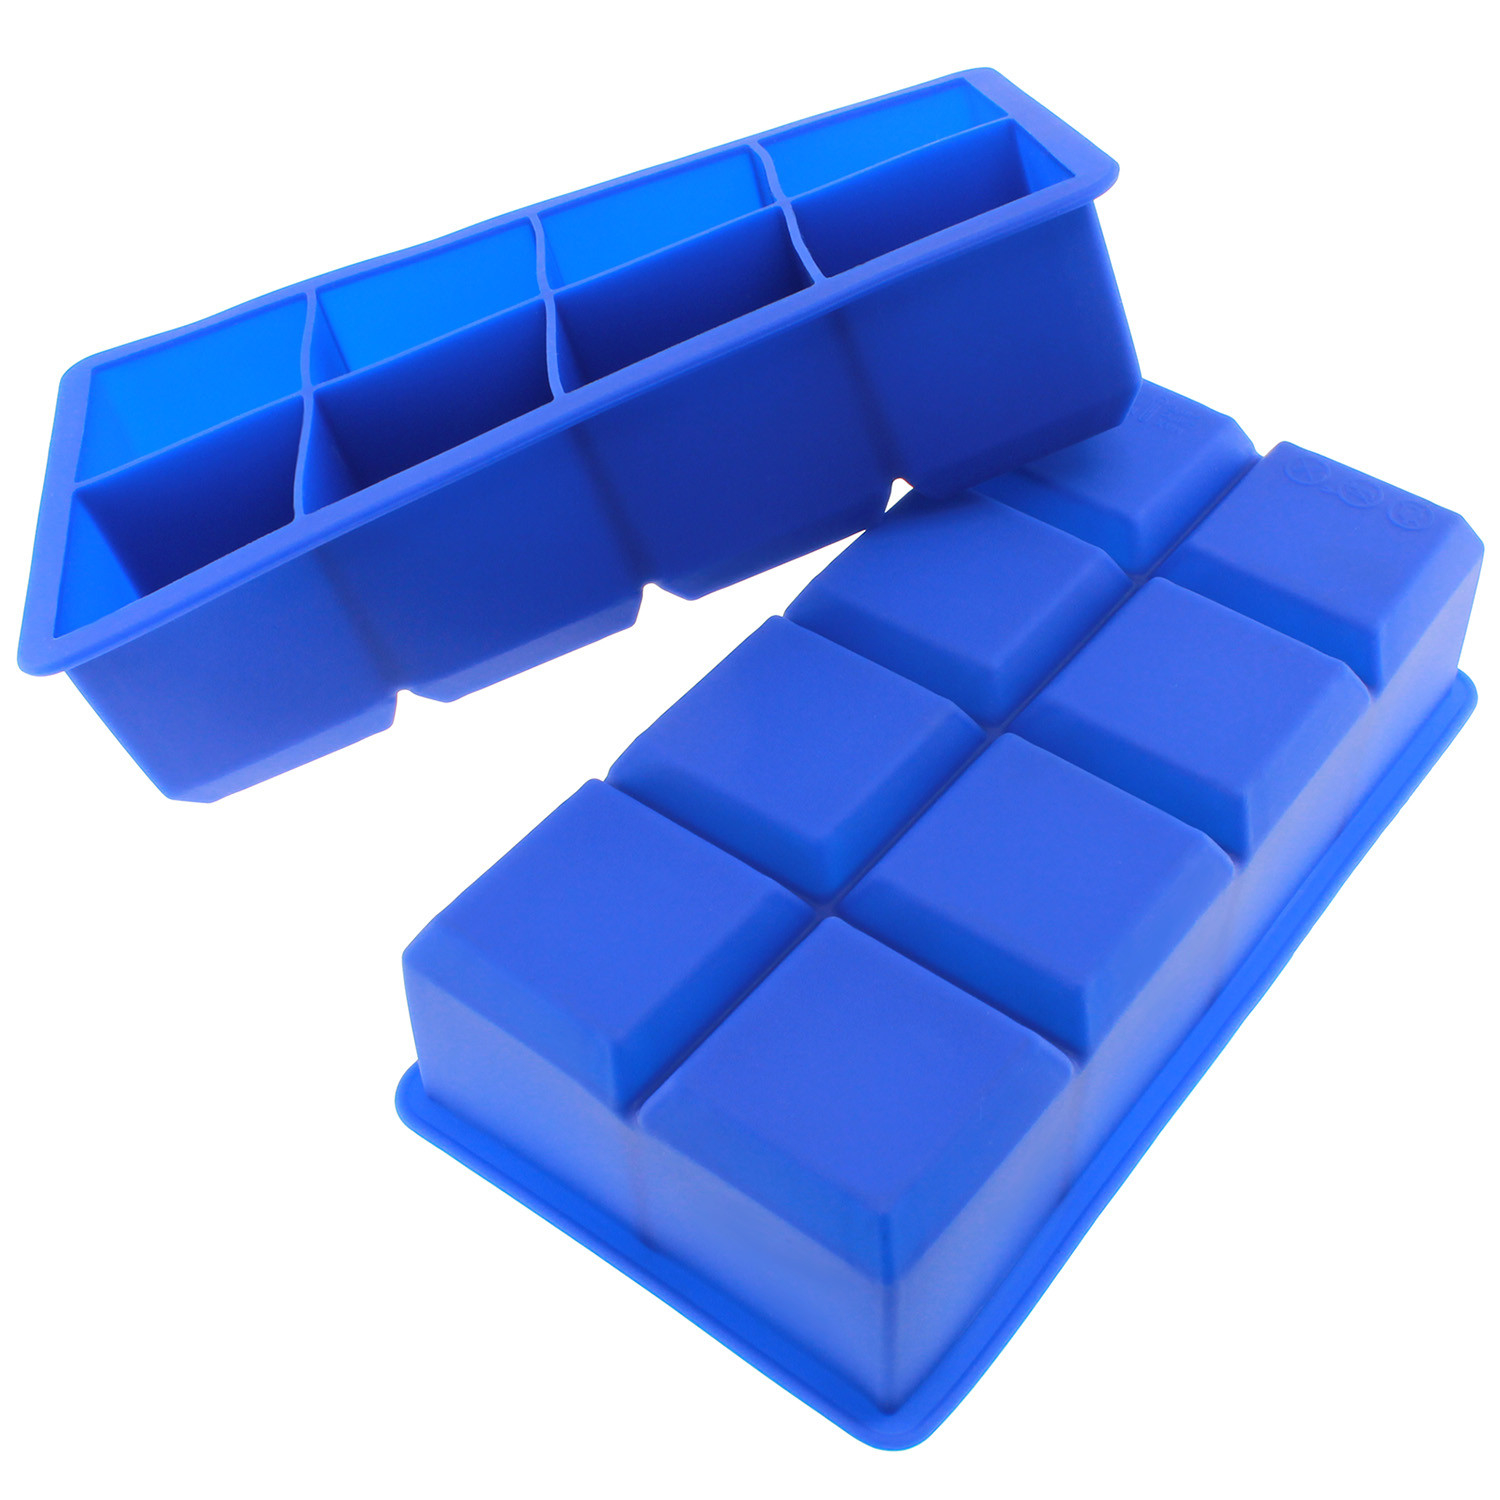 Freshware Silicone Ice Cube Trays, 2-Inch, Blue, 8-Cavity, Pack of 2